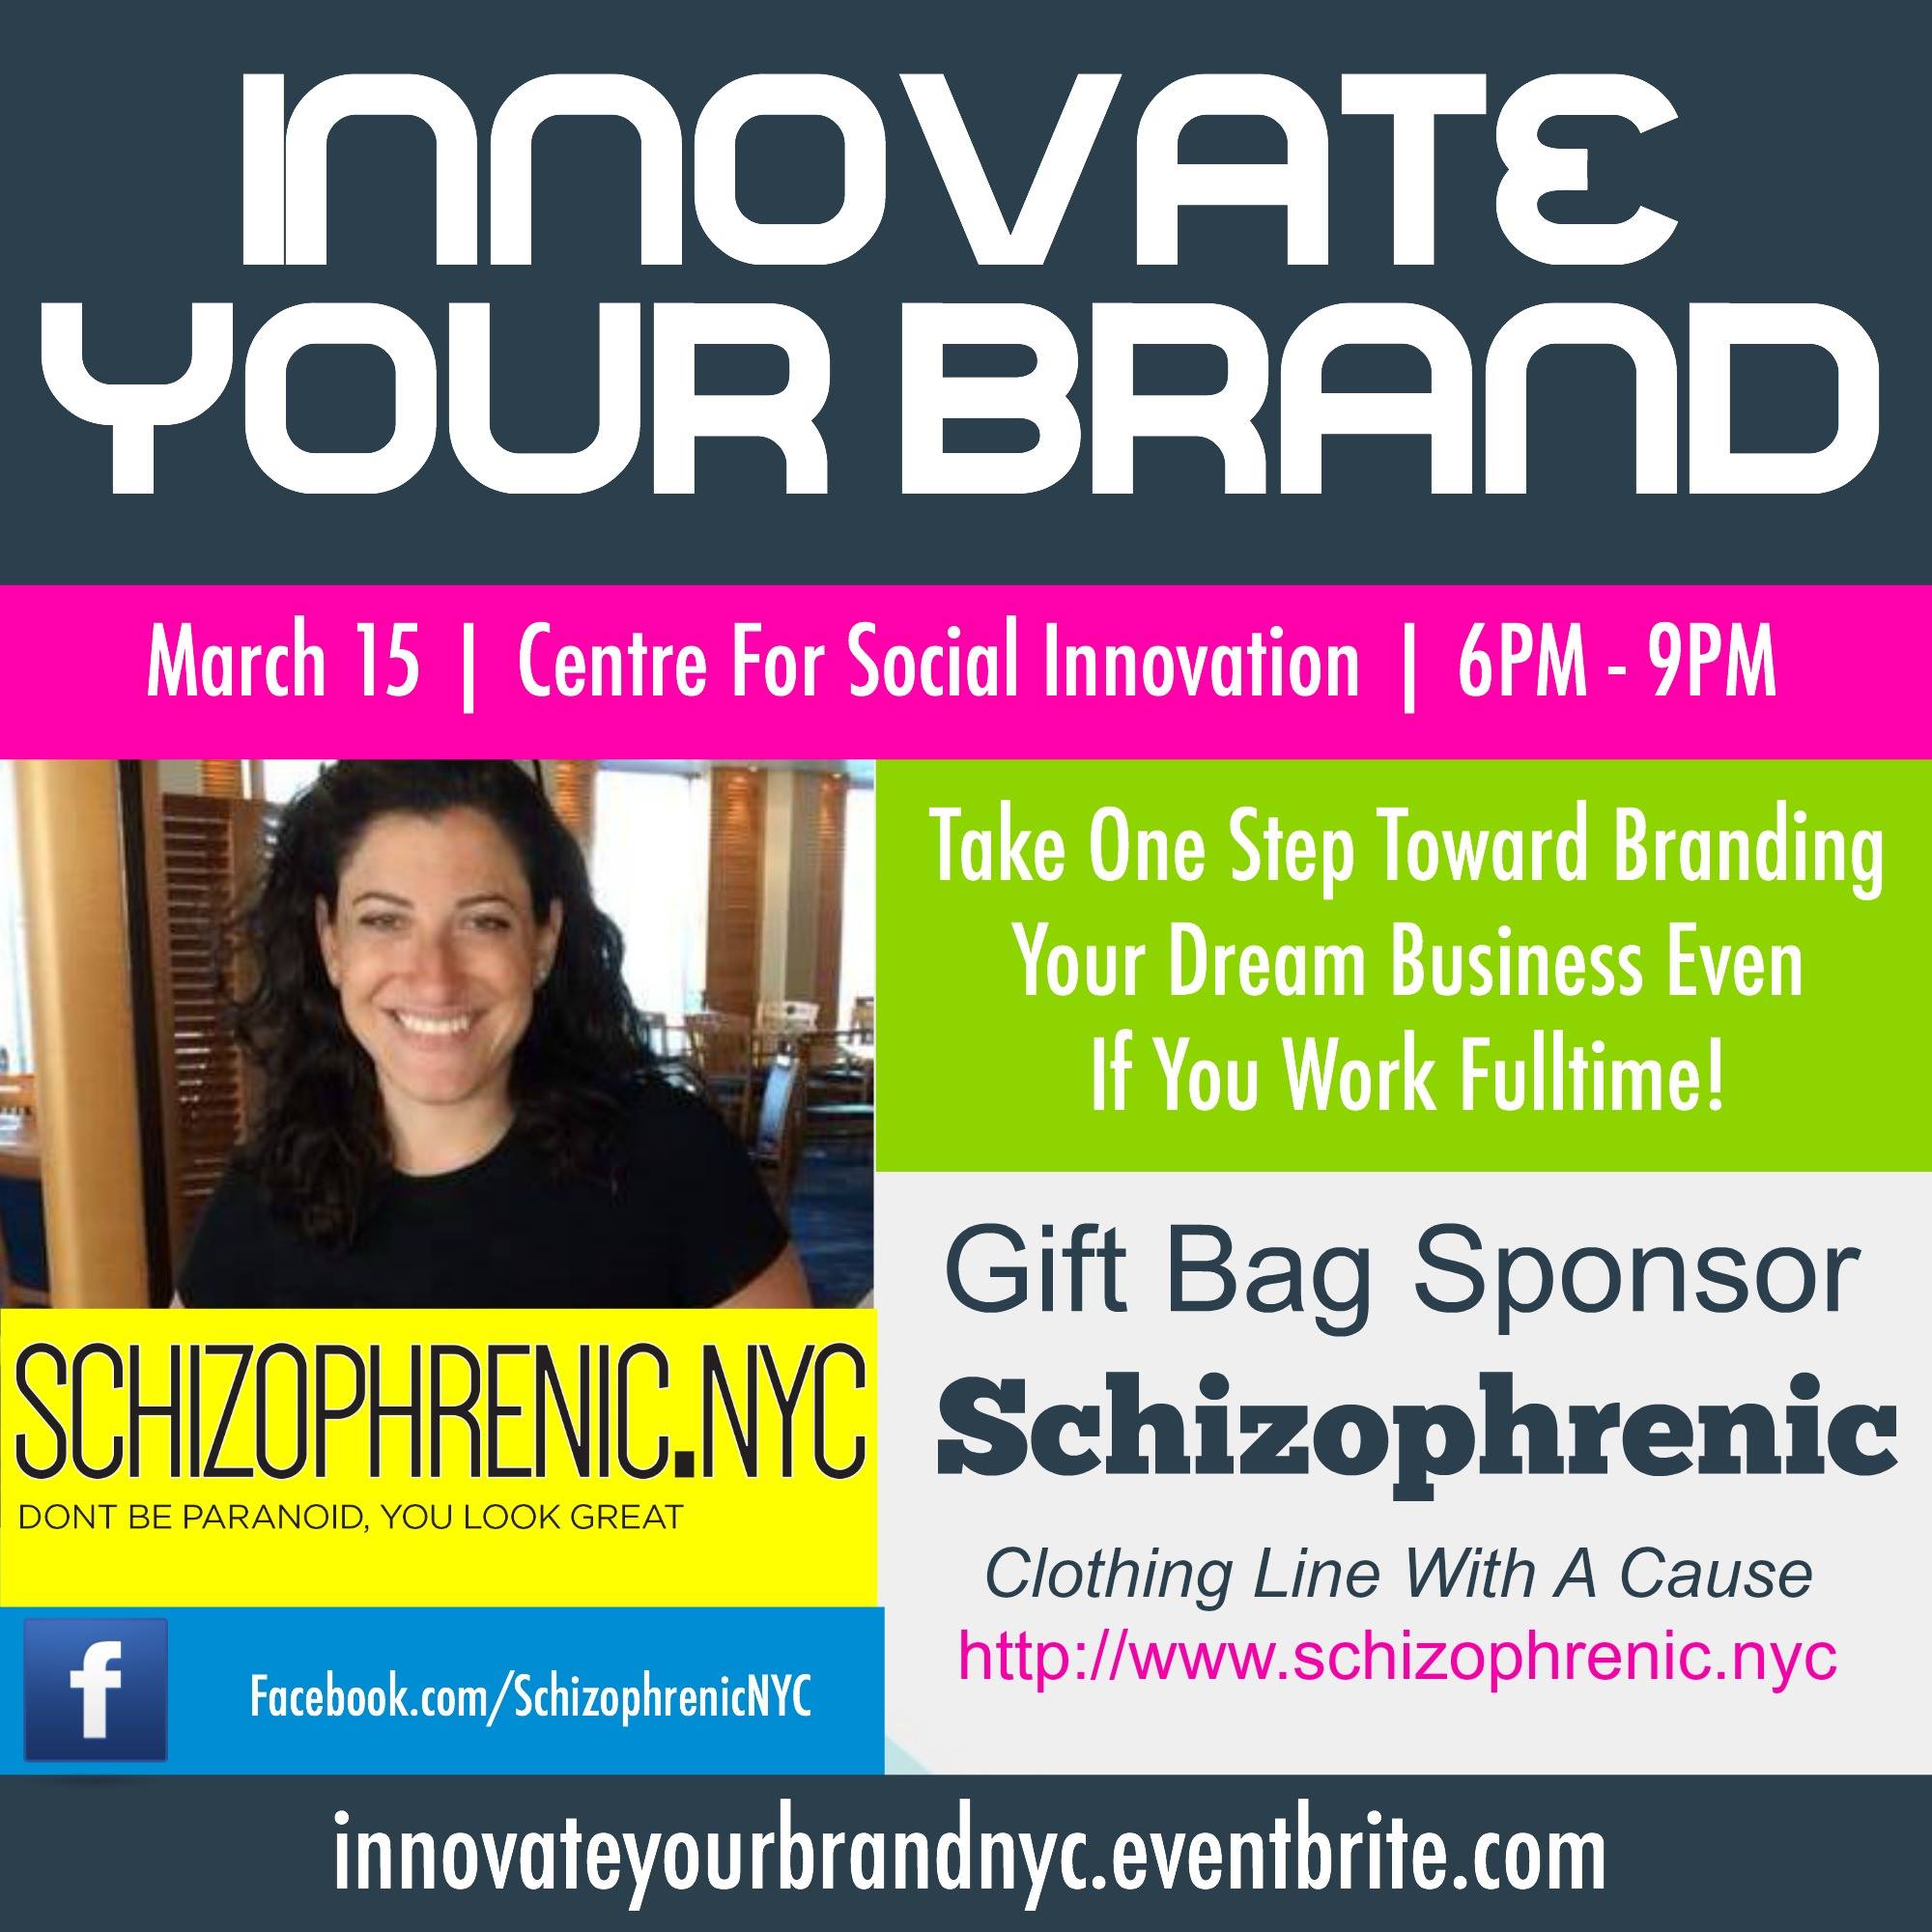 Find me at Innovate Your Brand!